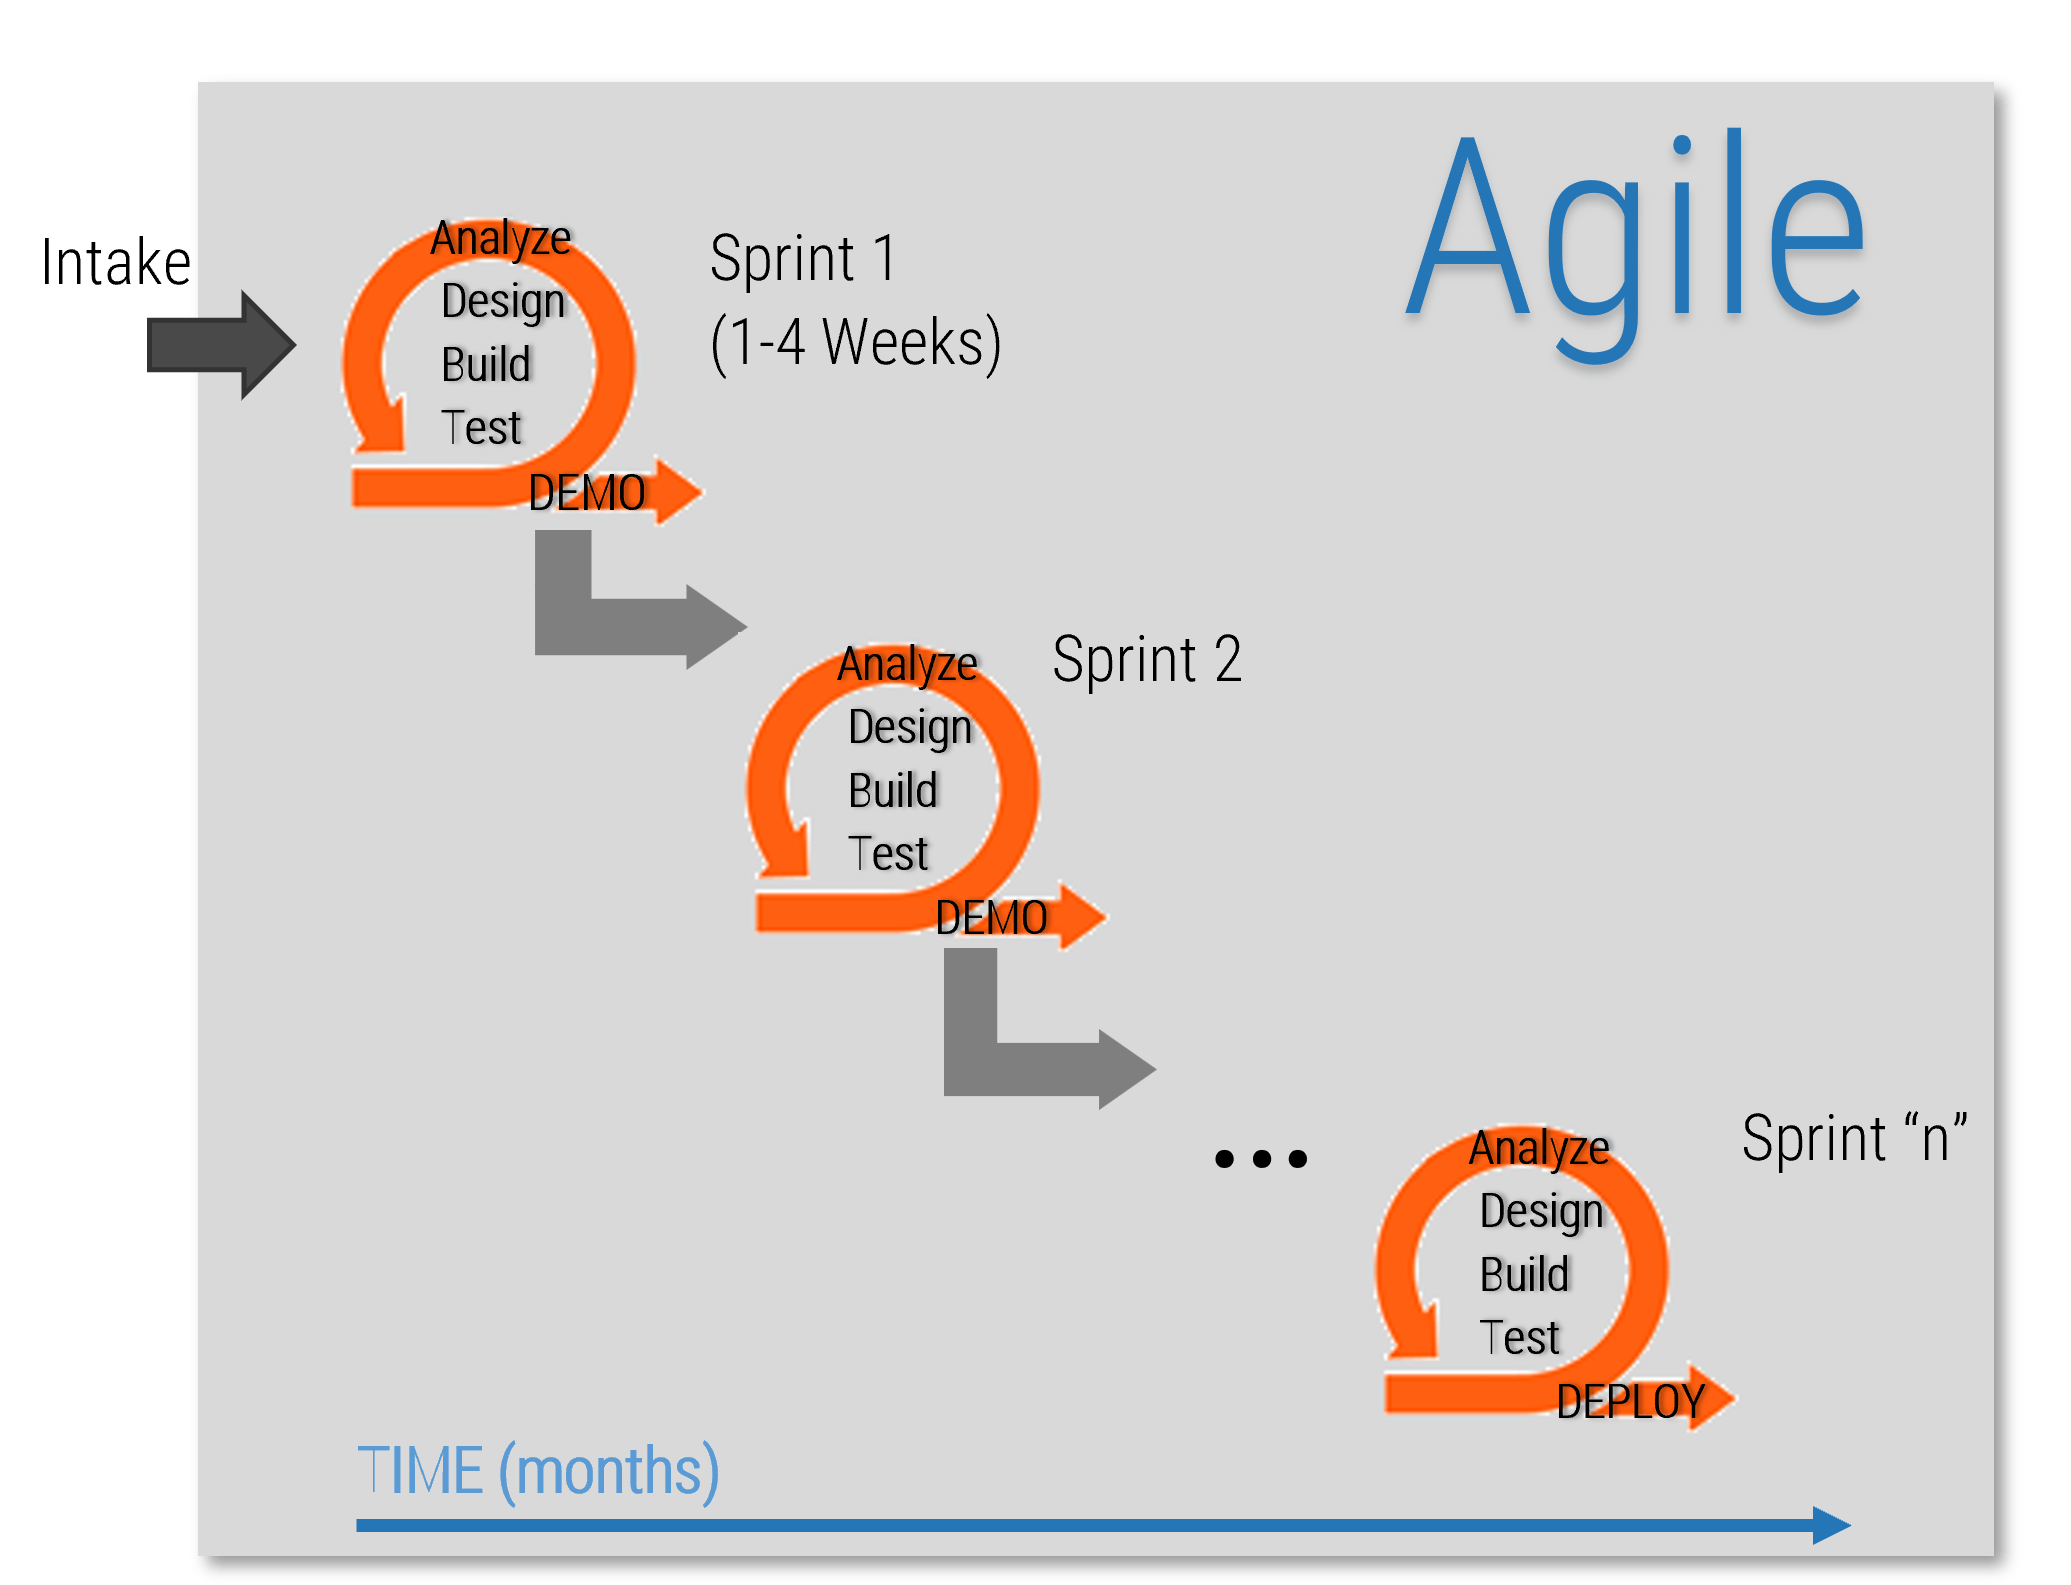 This is an example of the Agile Approach